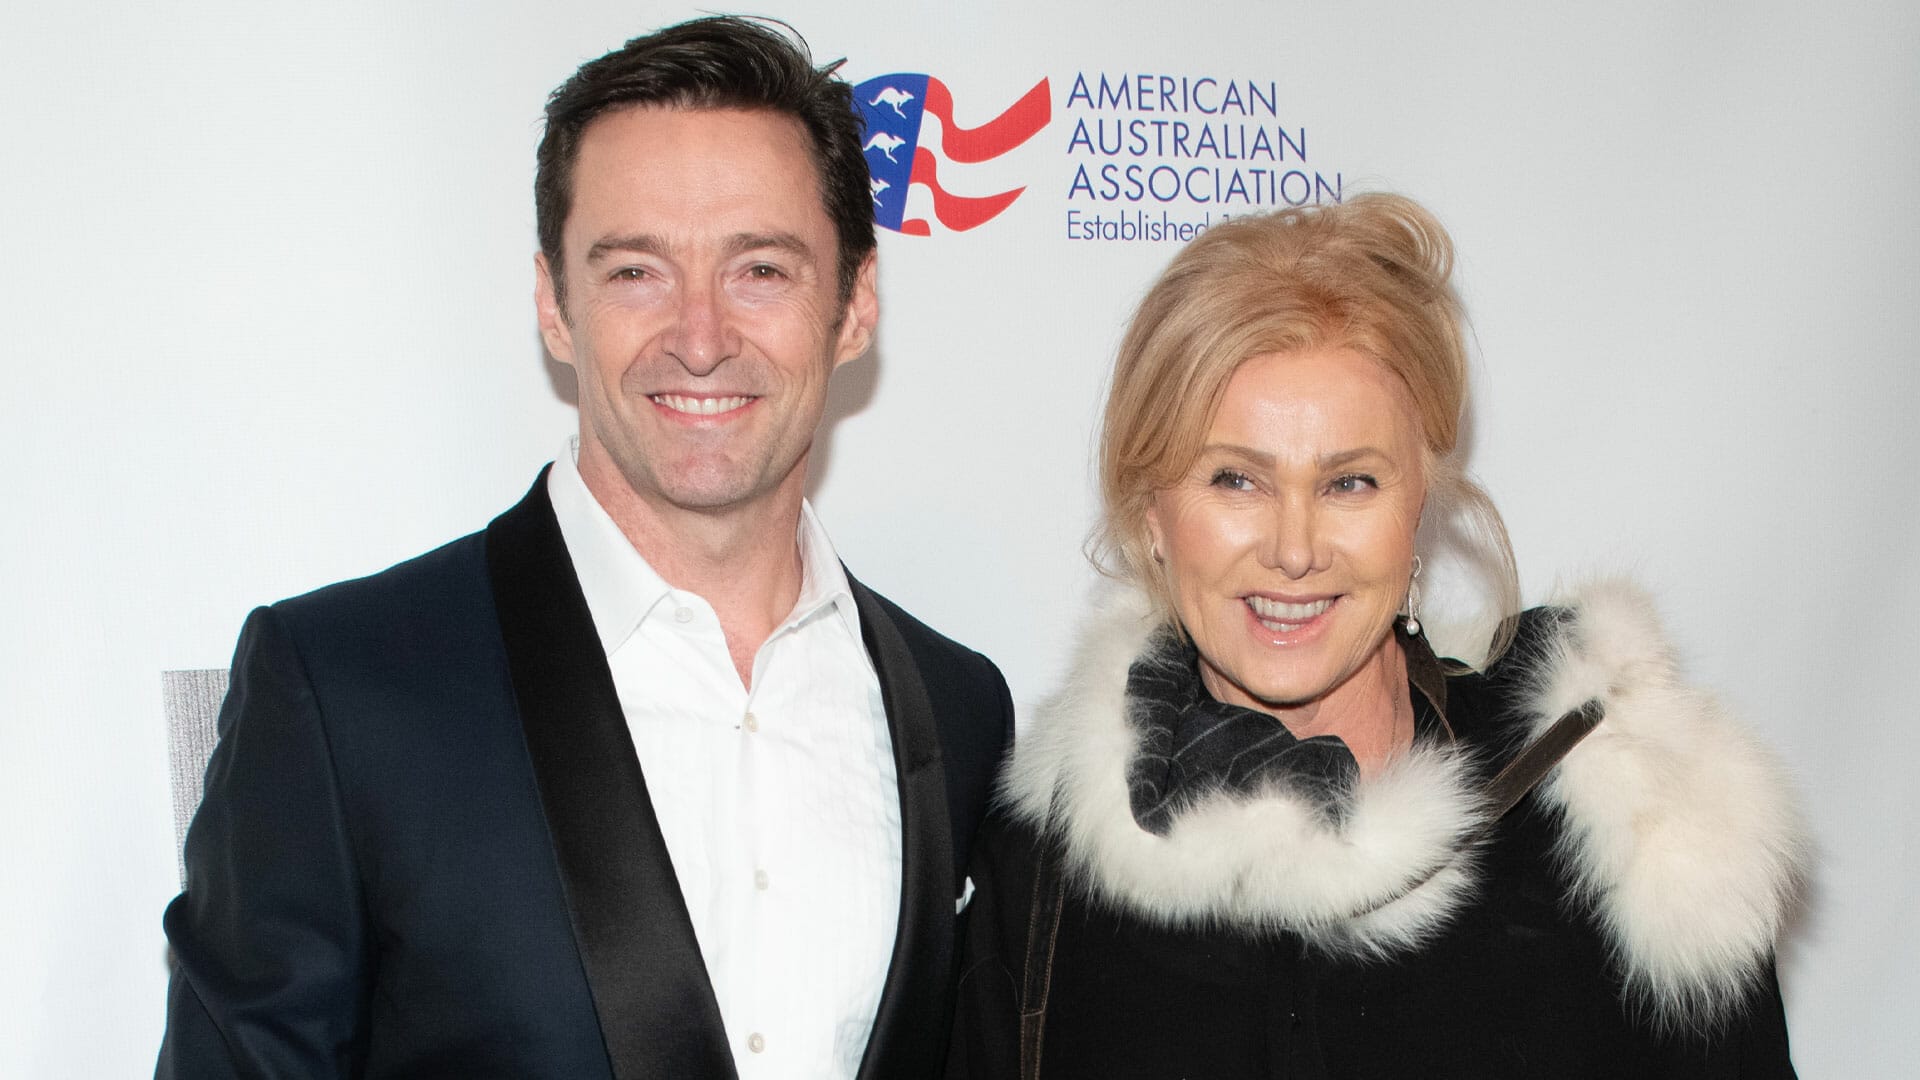 Hugh Jackman and wife Deborra-lee Furness separate after 27 years of marriage as they focus on ‘individual growth’